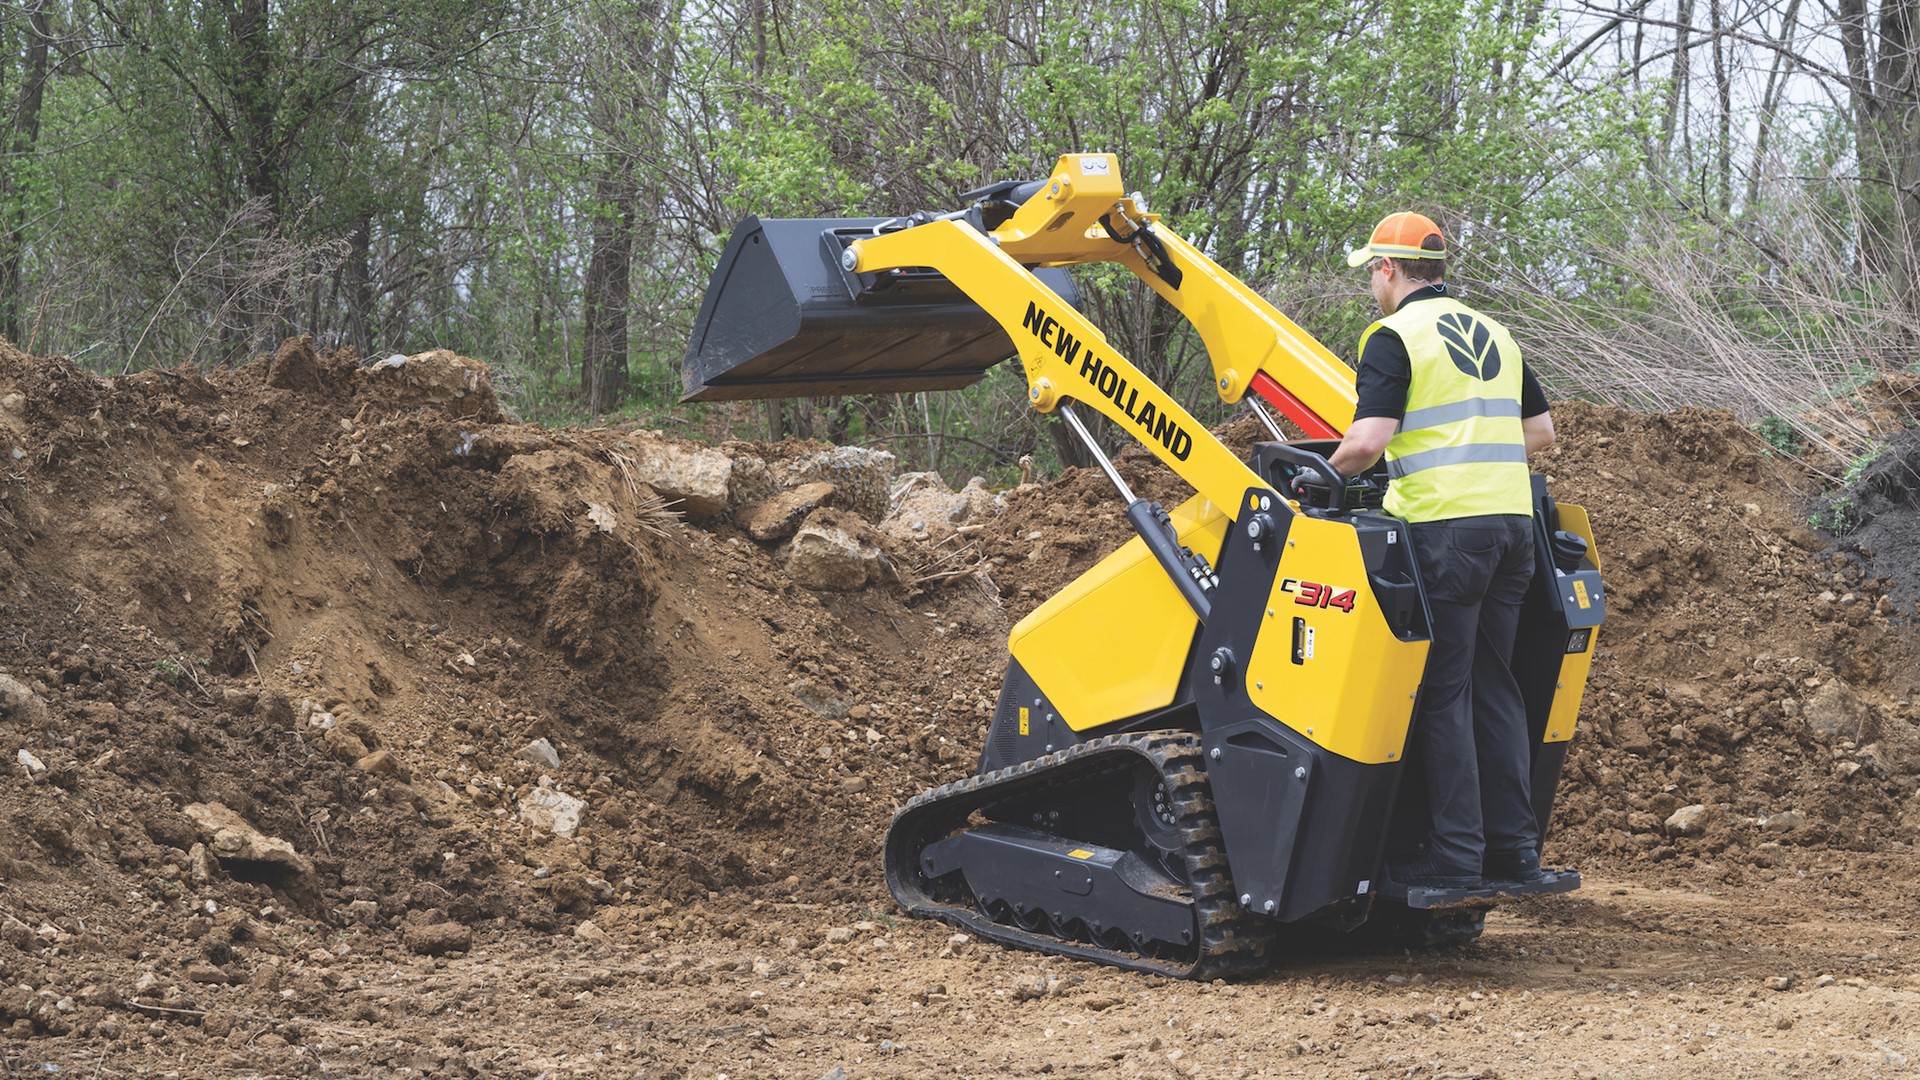 New Holland Construction C314 Mini Track Loader Now Available in North America